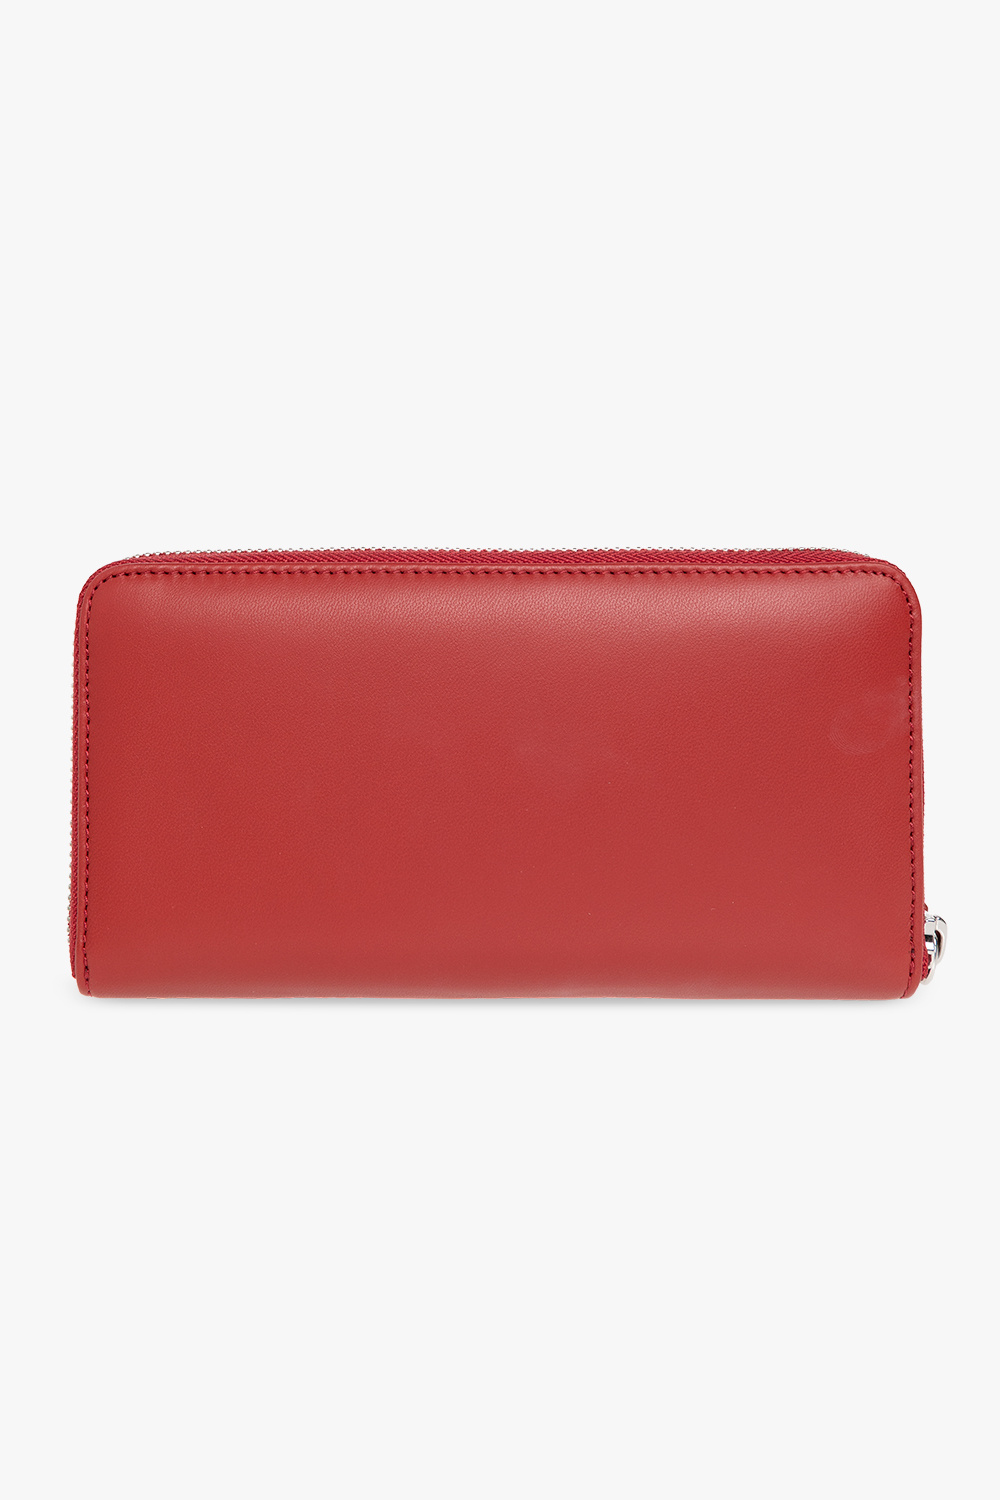 Vivienne Westwood Leather wallet with logo